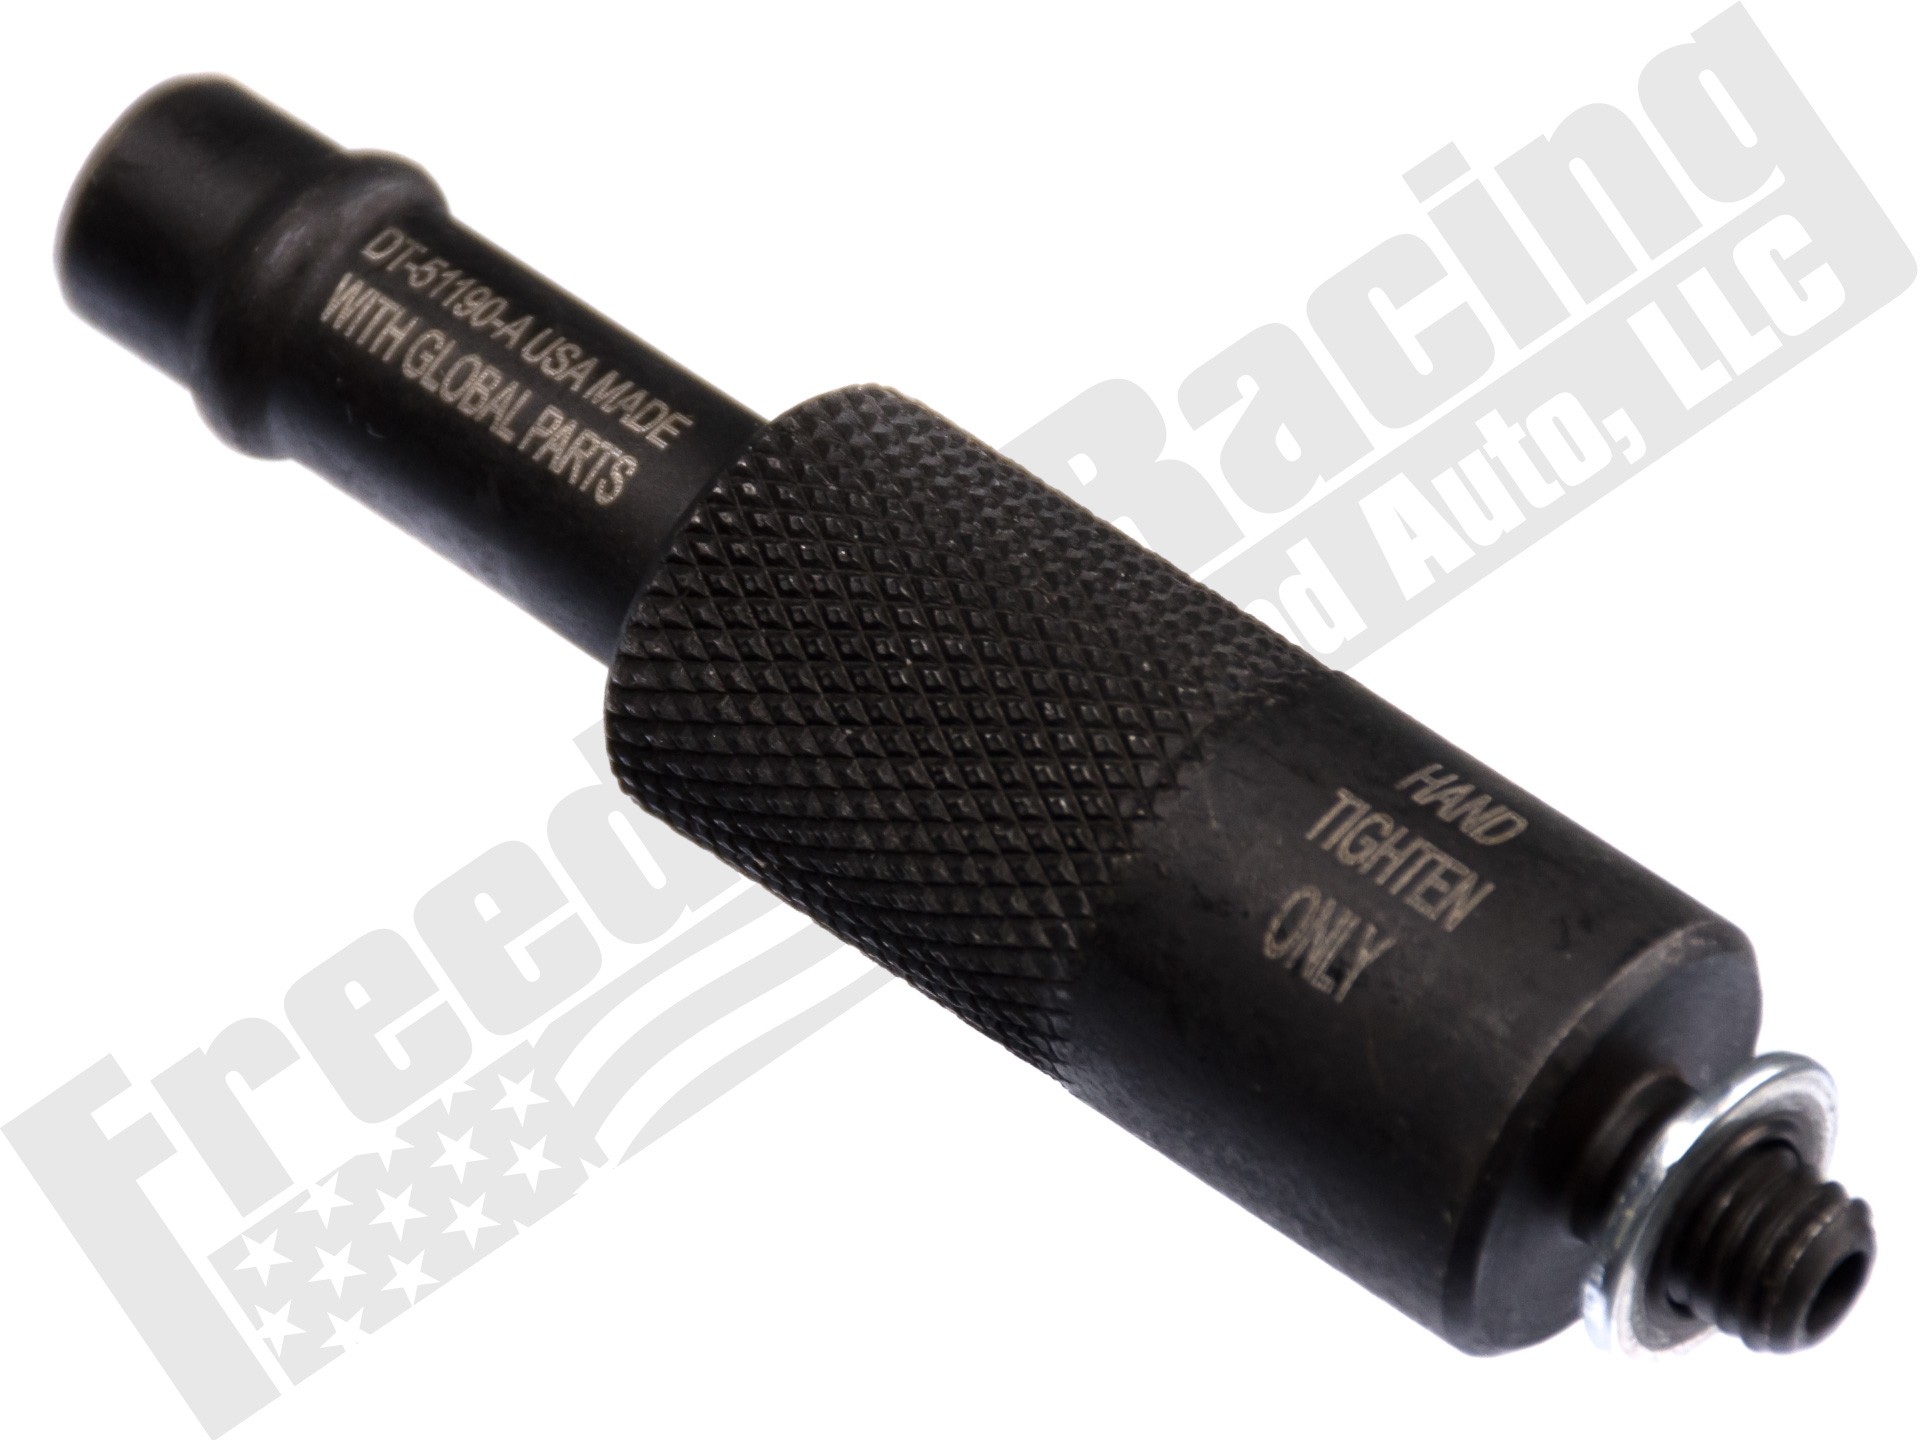 Kent-Moore DT-51190-A Transmission Oil Fill Adapter